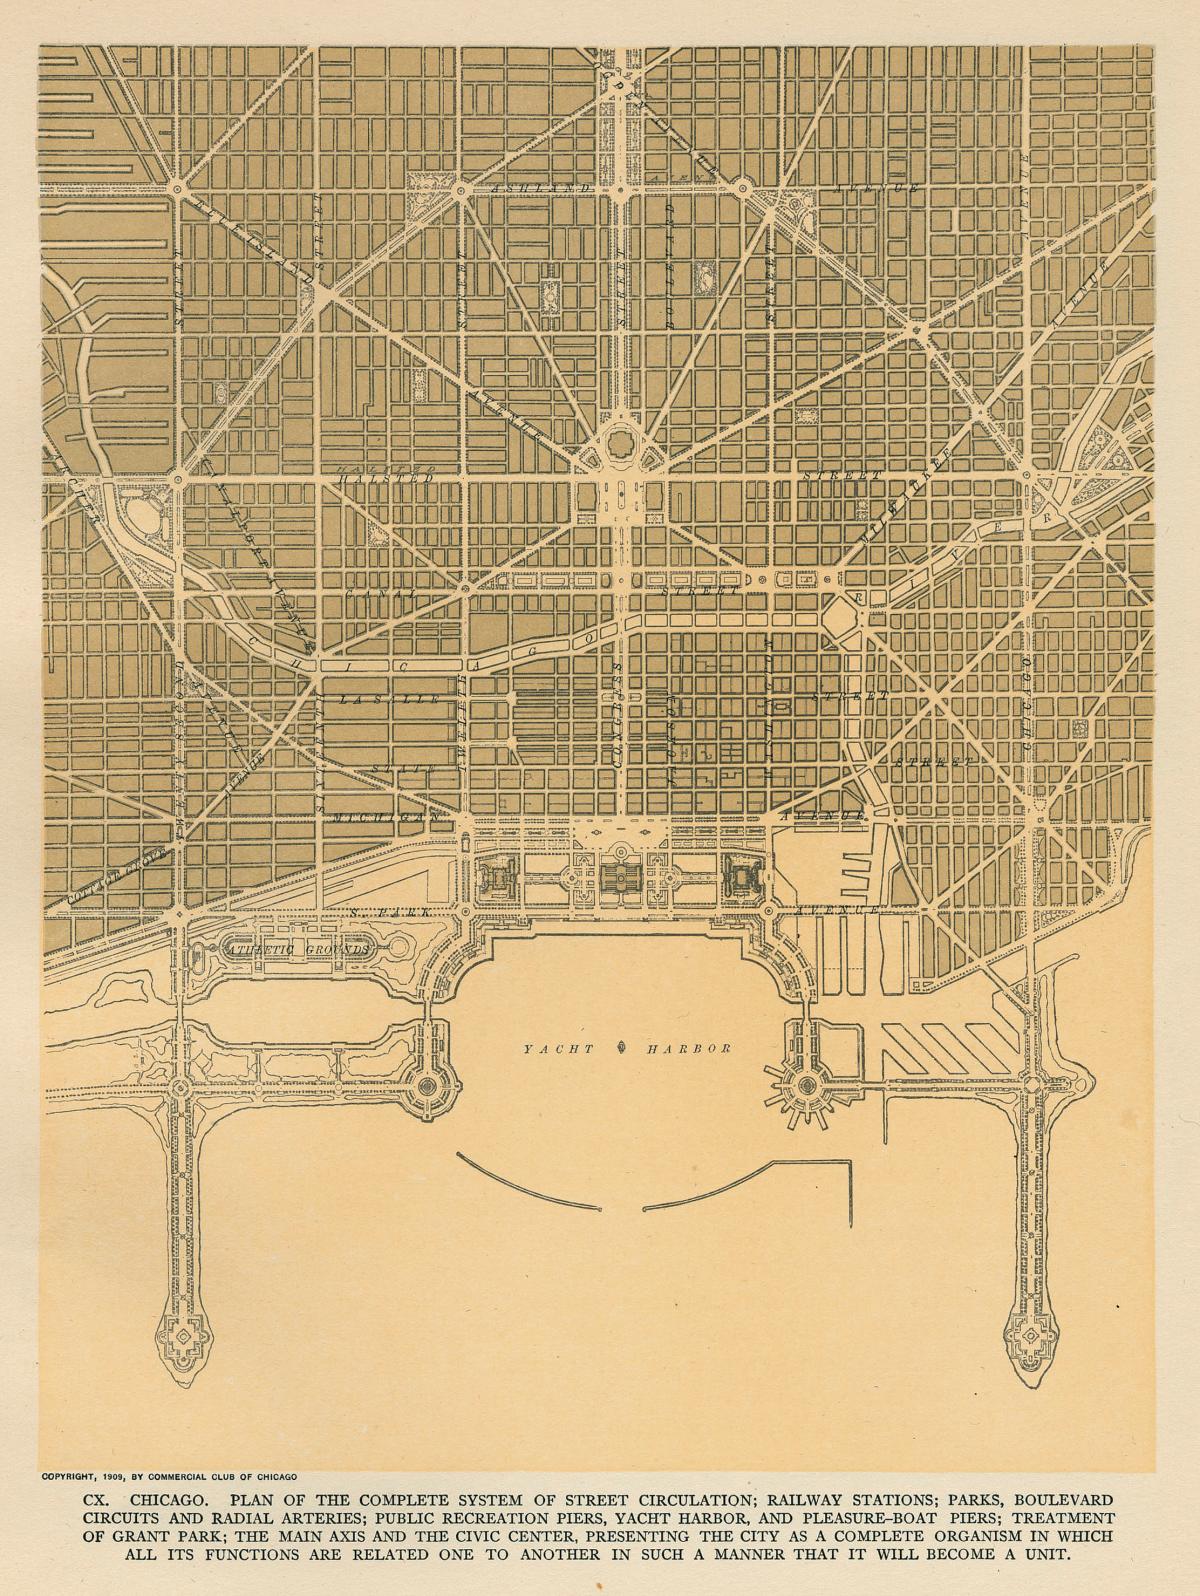 A yellowing map of Chicago, with civic center at the middle